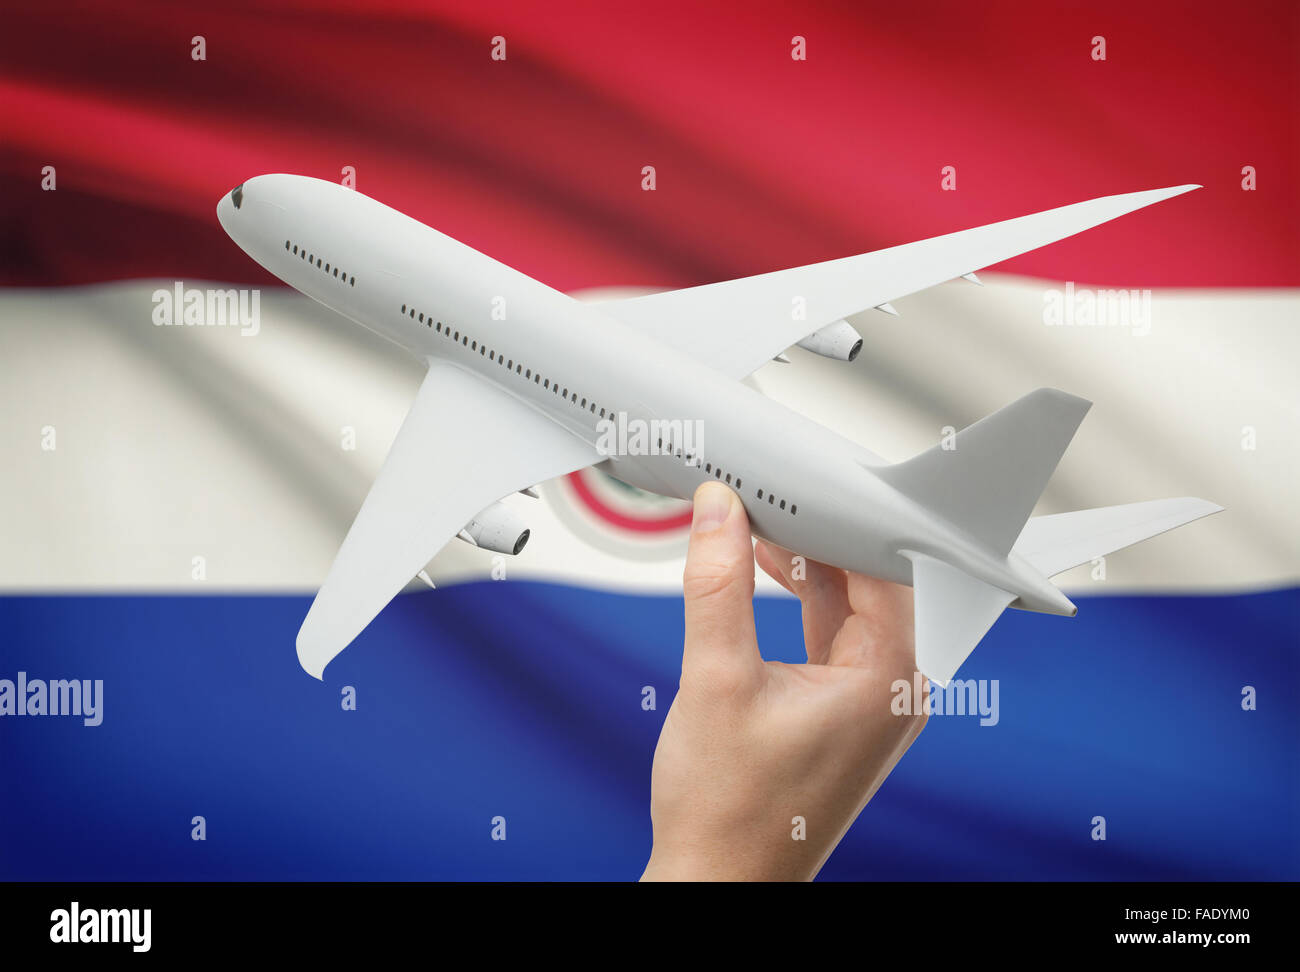 Airplane in hand with national flag on background - Paraguay Stock Photo